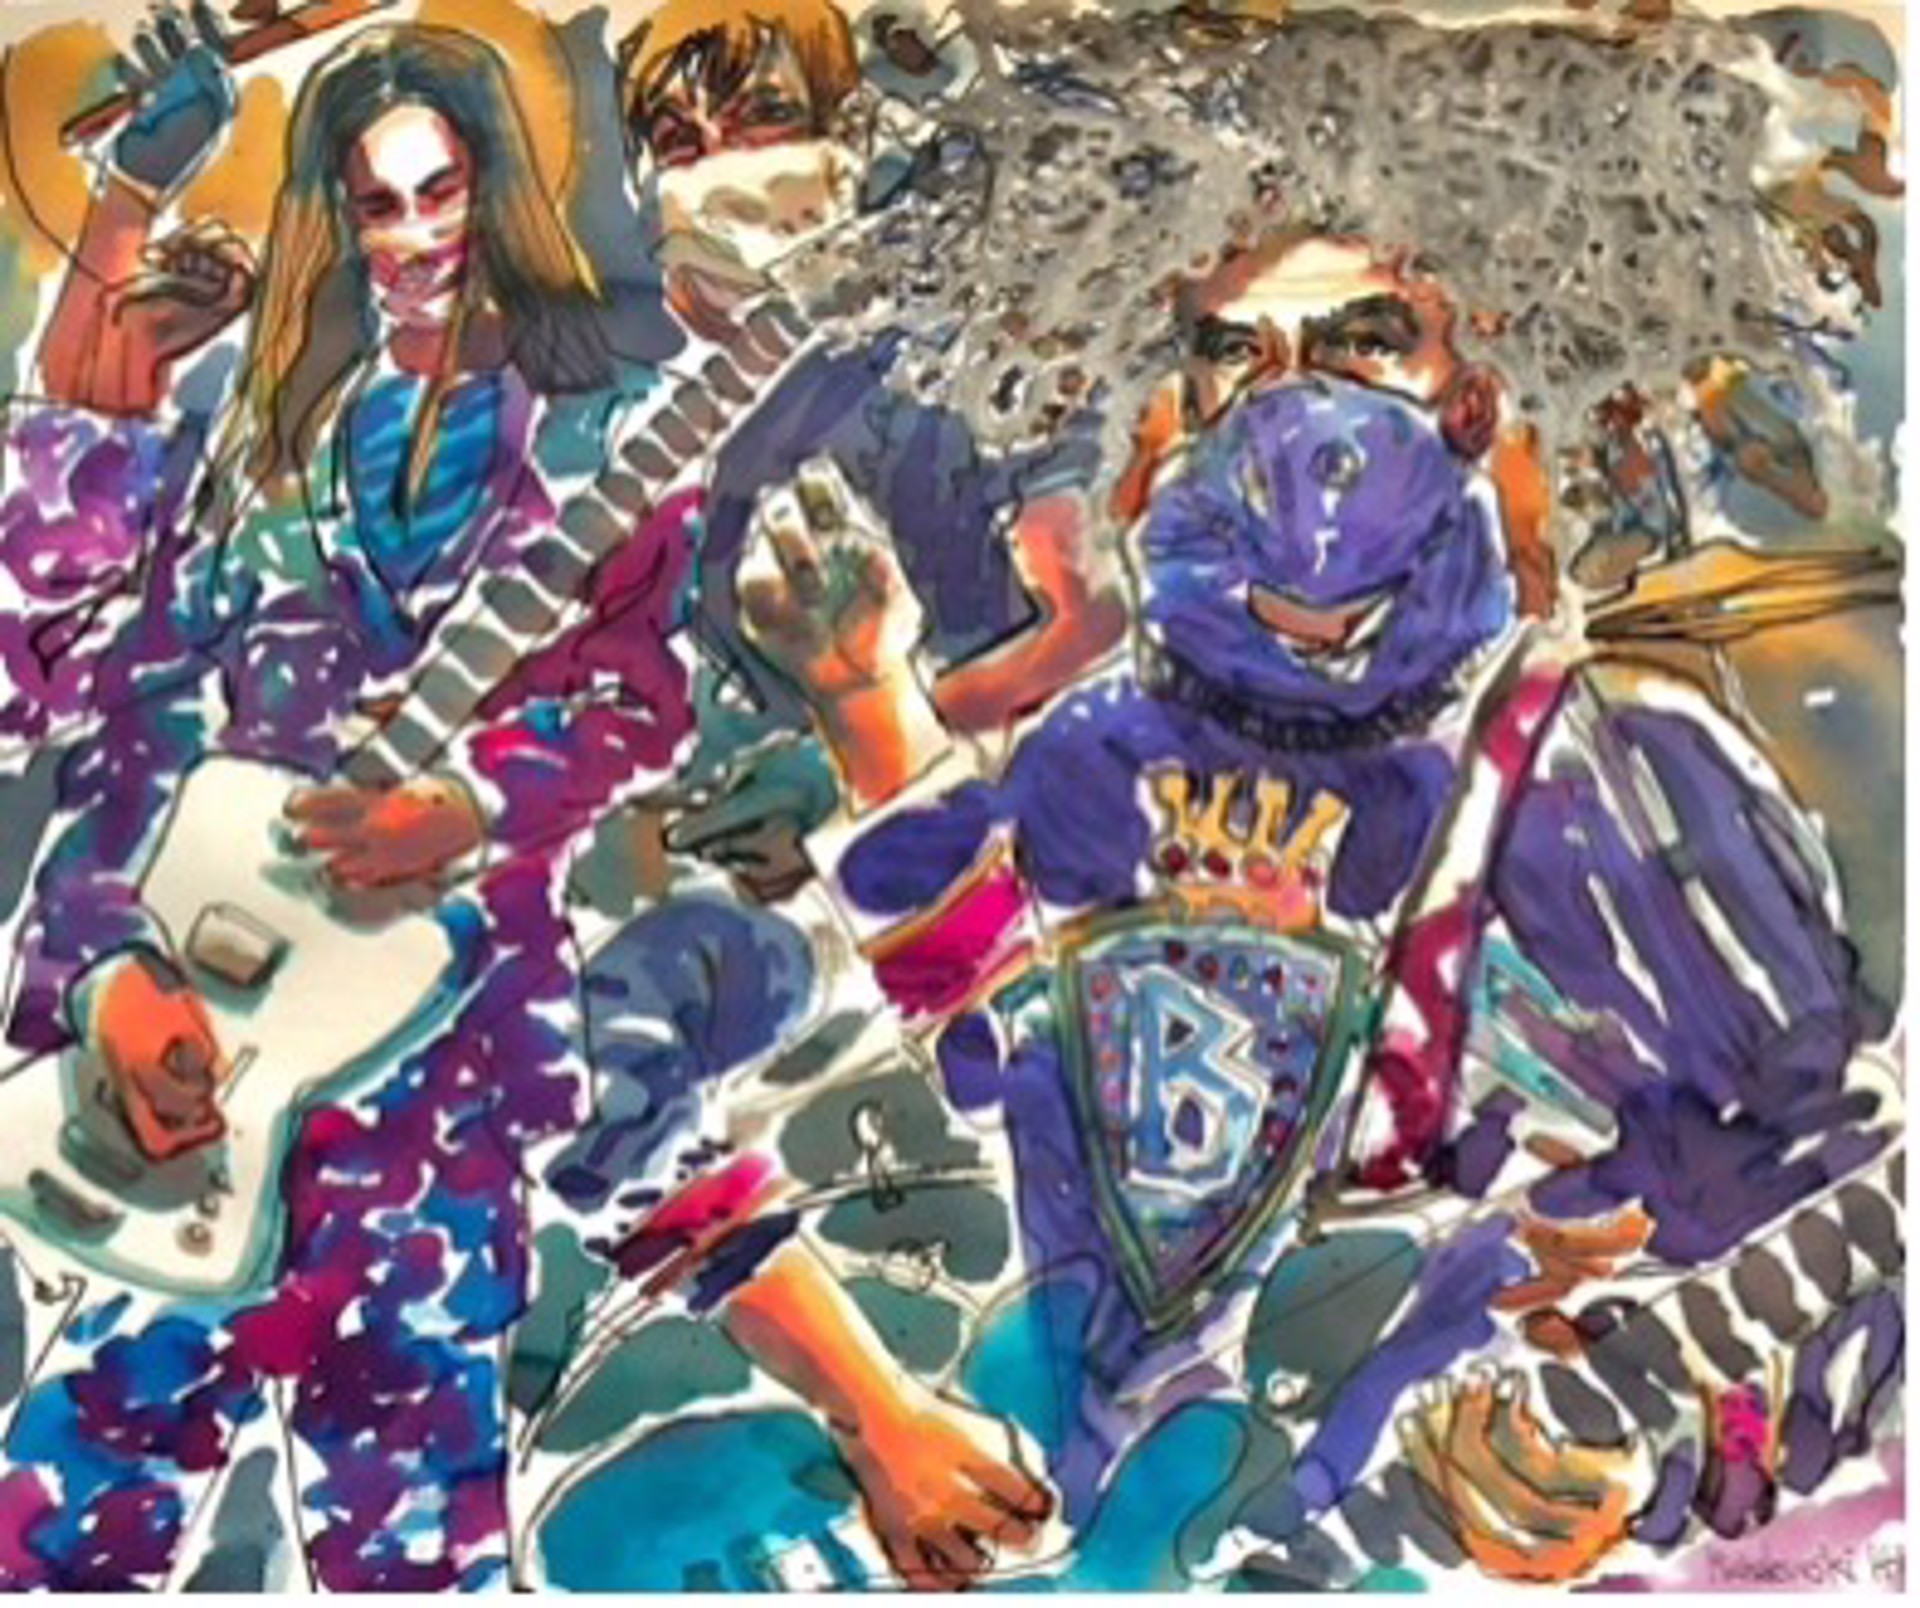 Live Drawing of Melvins by Ted Michalowski